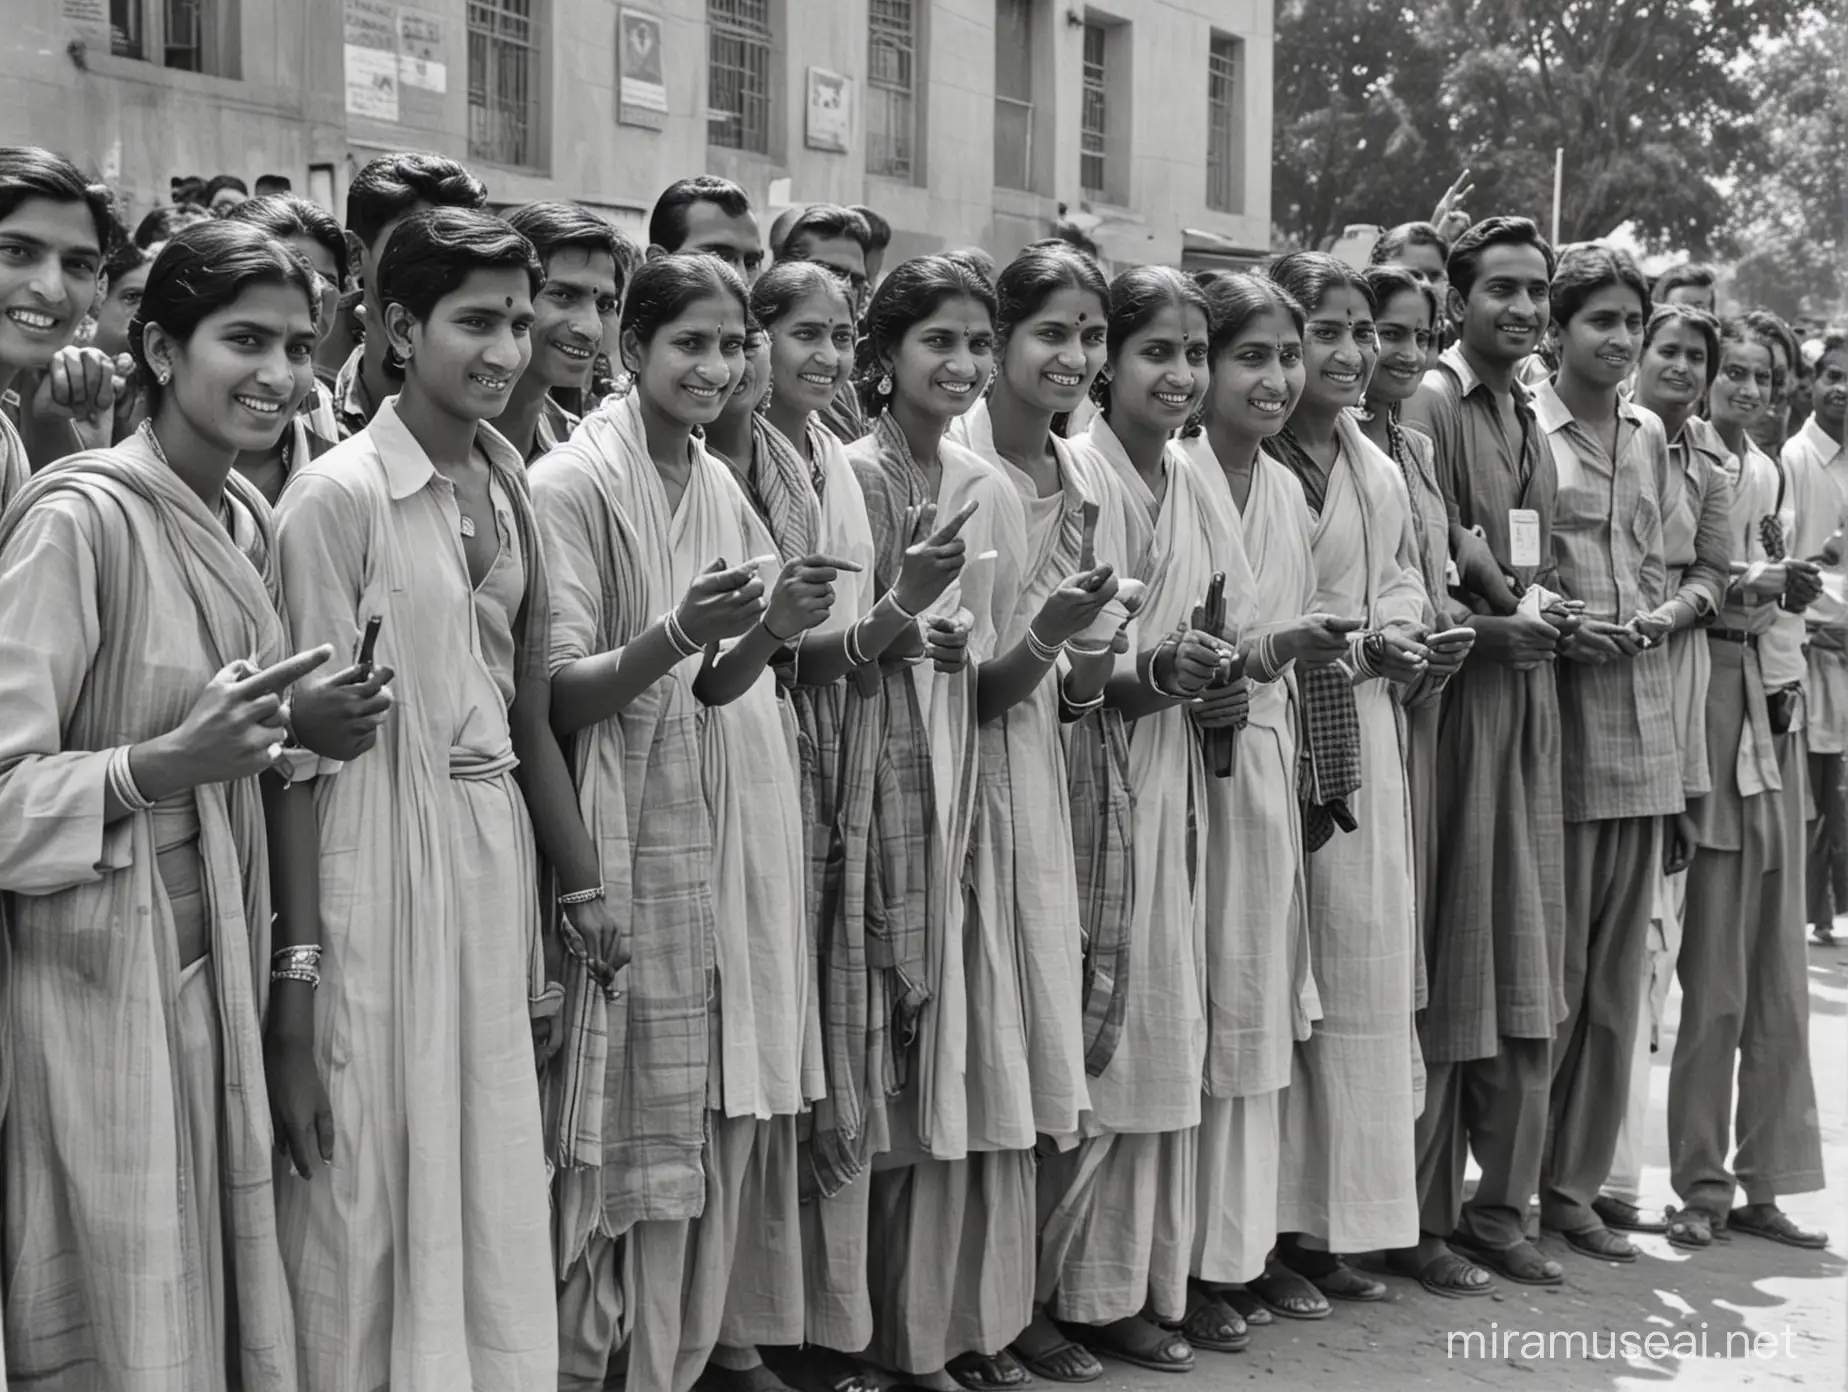 A group of Indian men and women are entering a polling booth to vote for the first time in 1952. They are showing their index finger that has an ink mark on it 